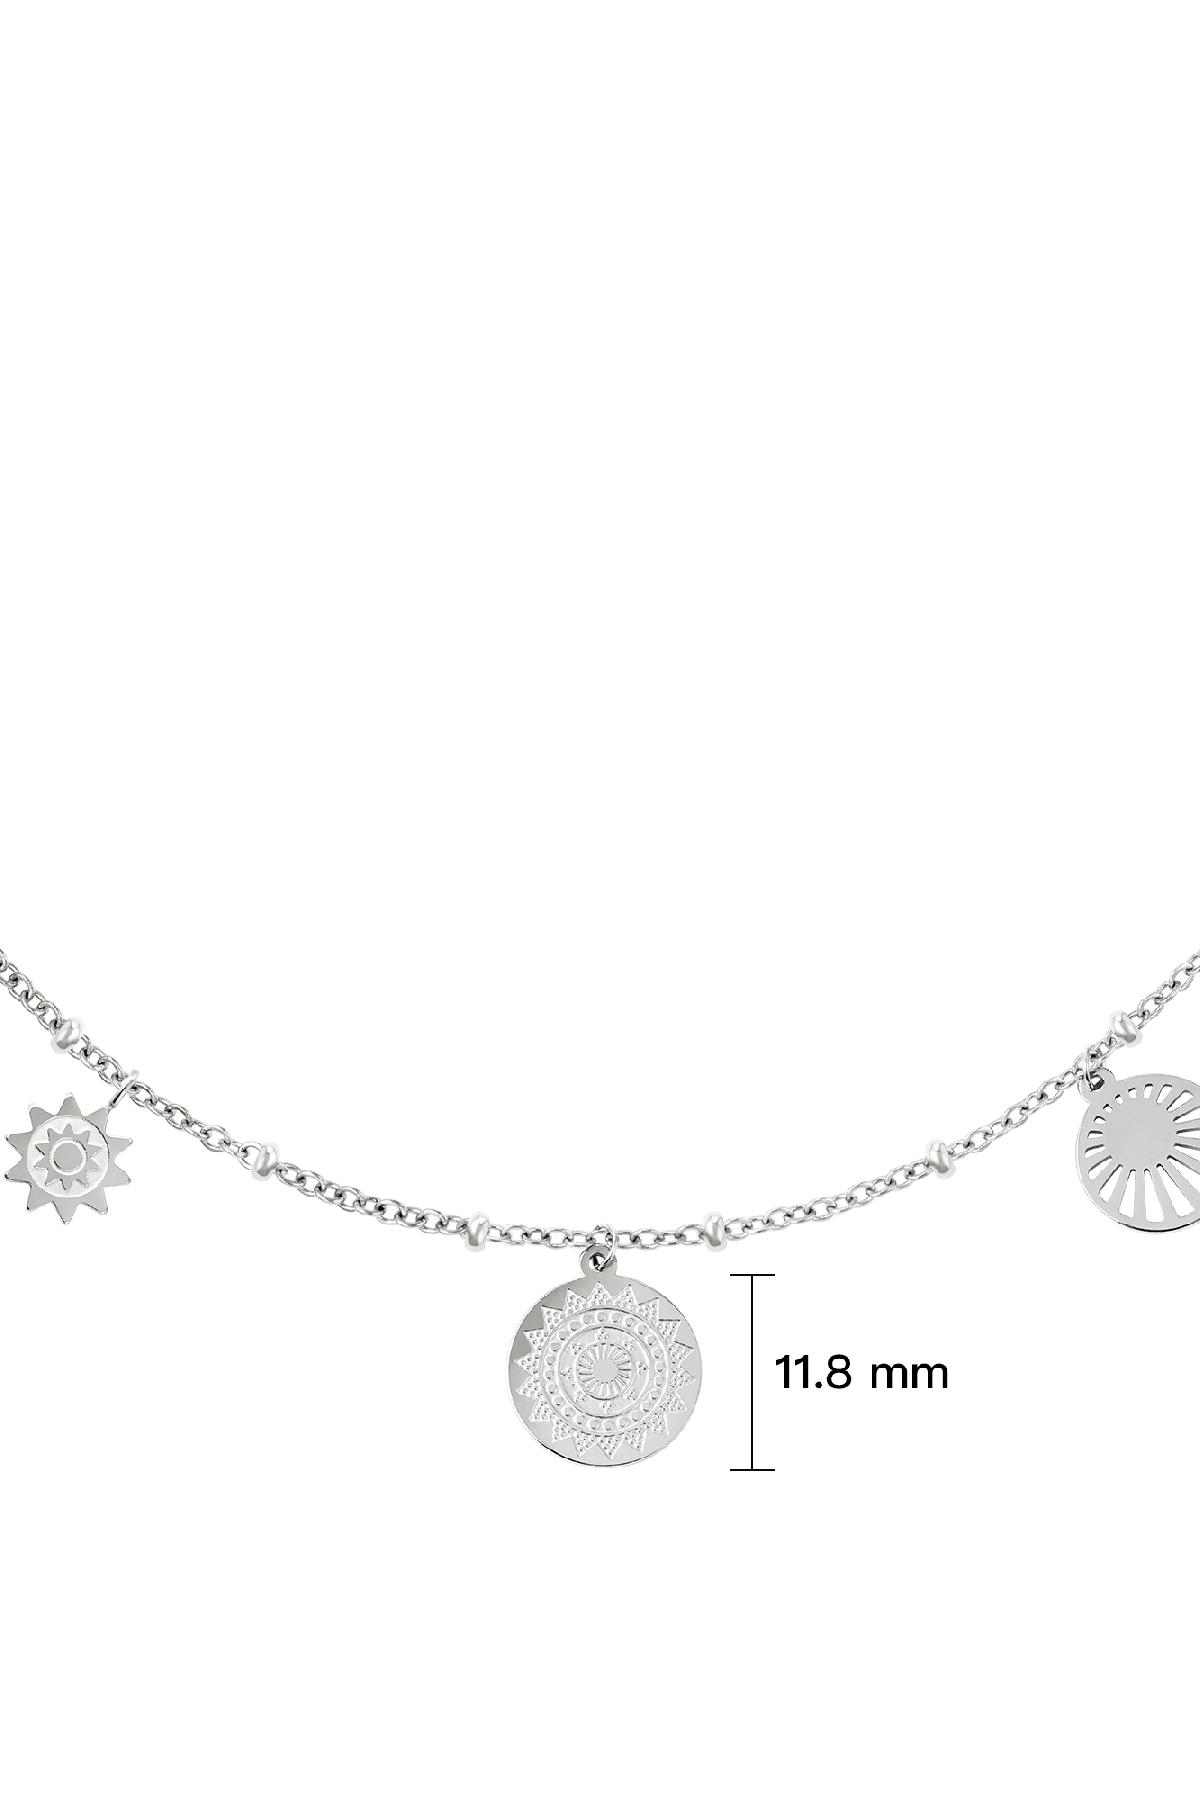 Collana sole Silver Stainless Steel h5 Immagine2